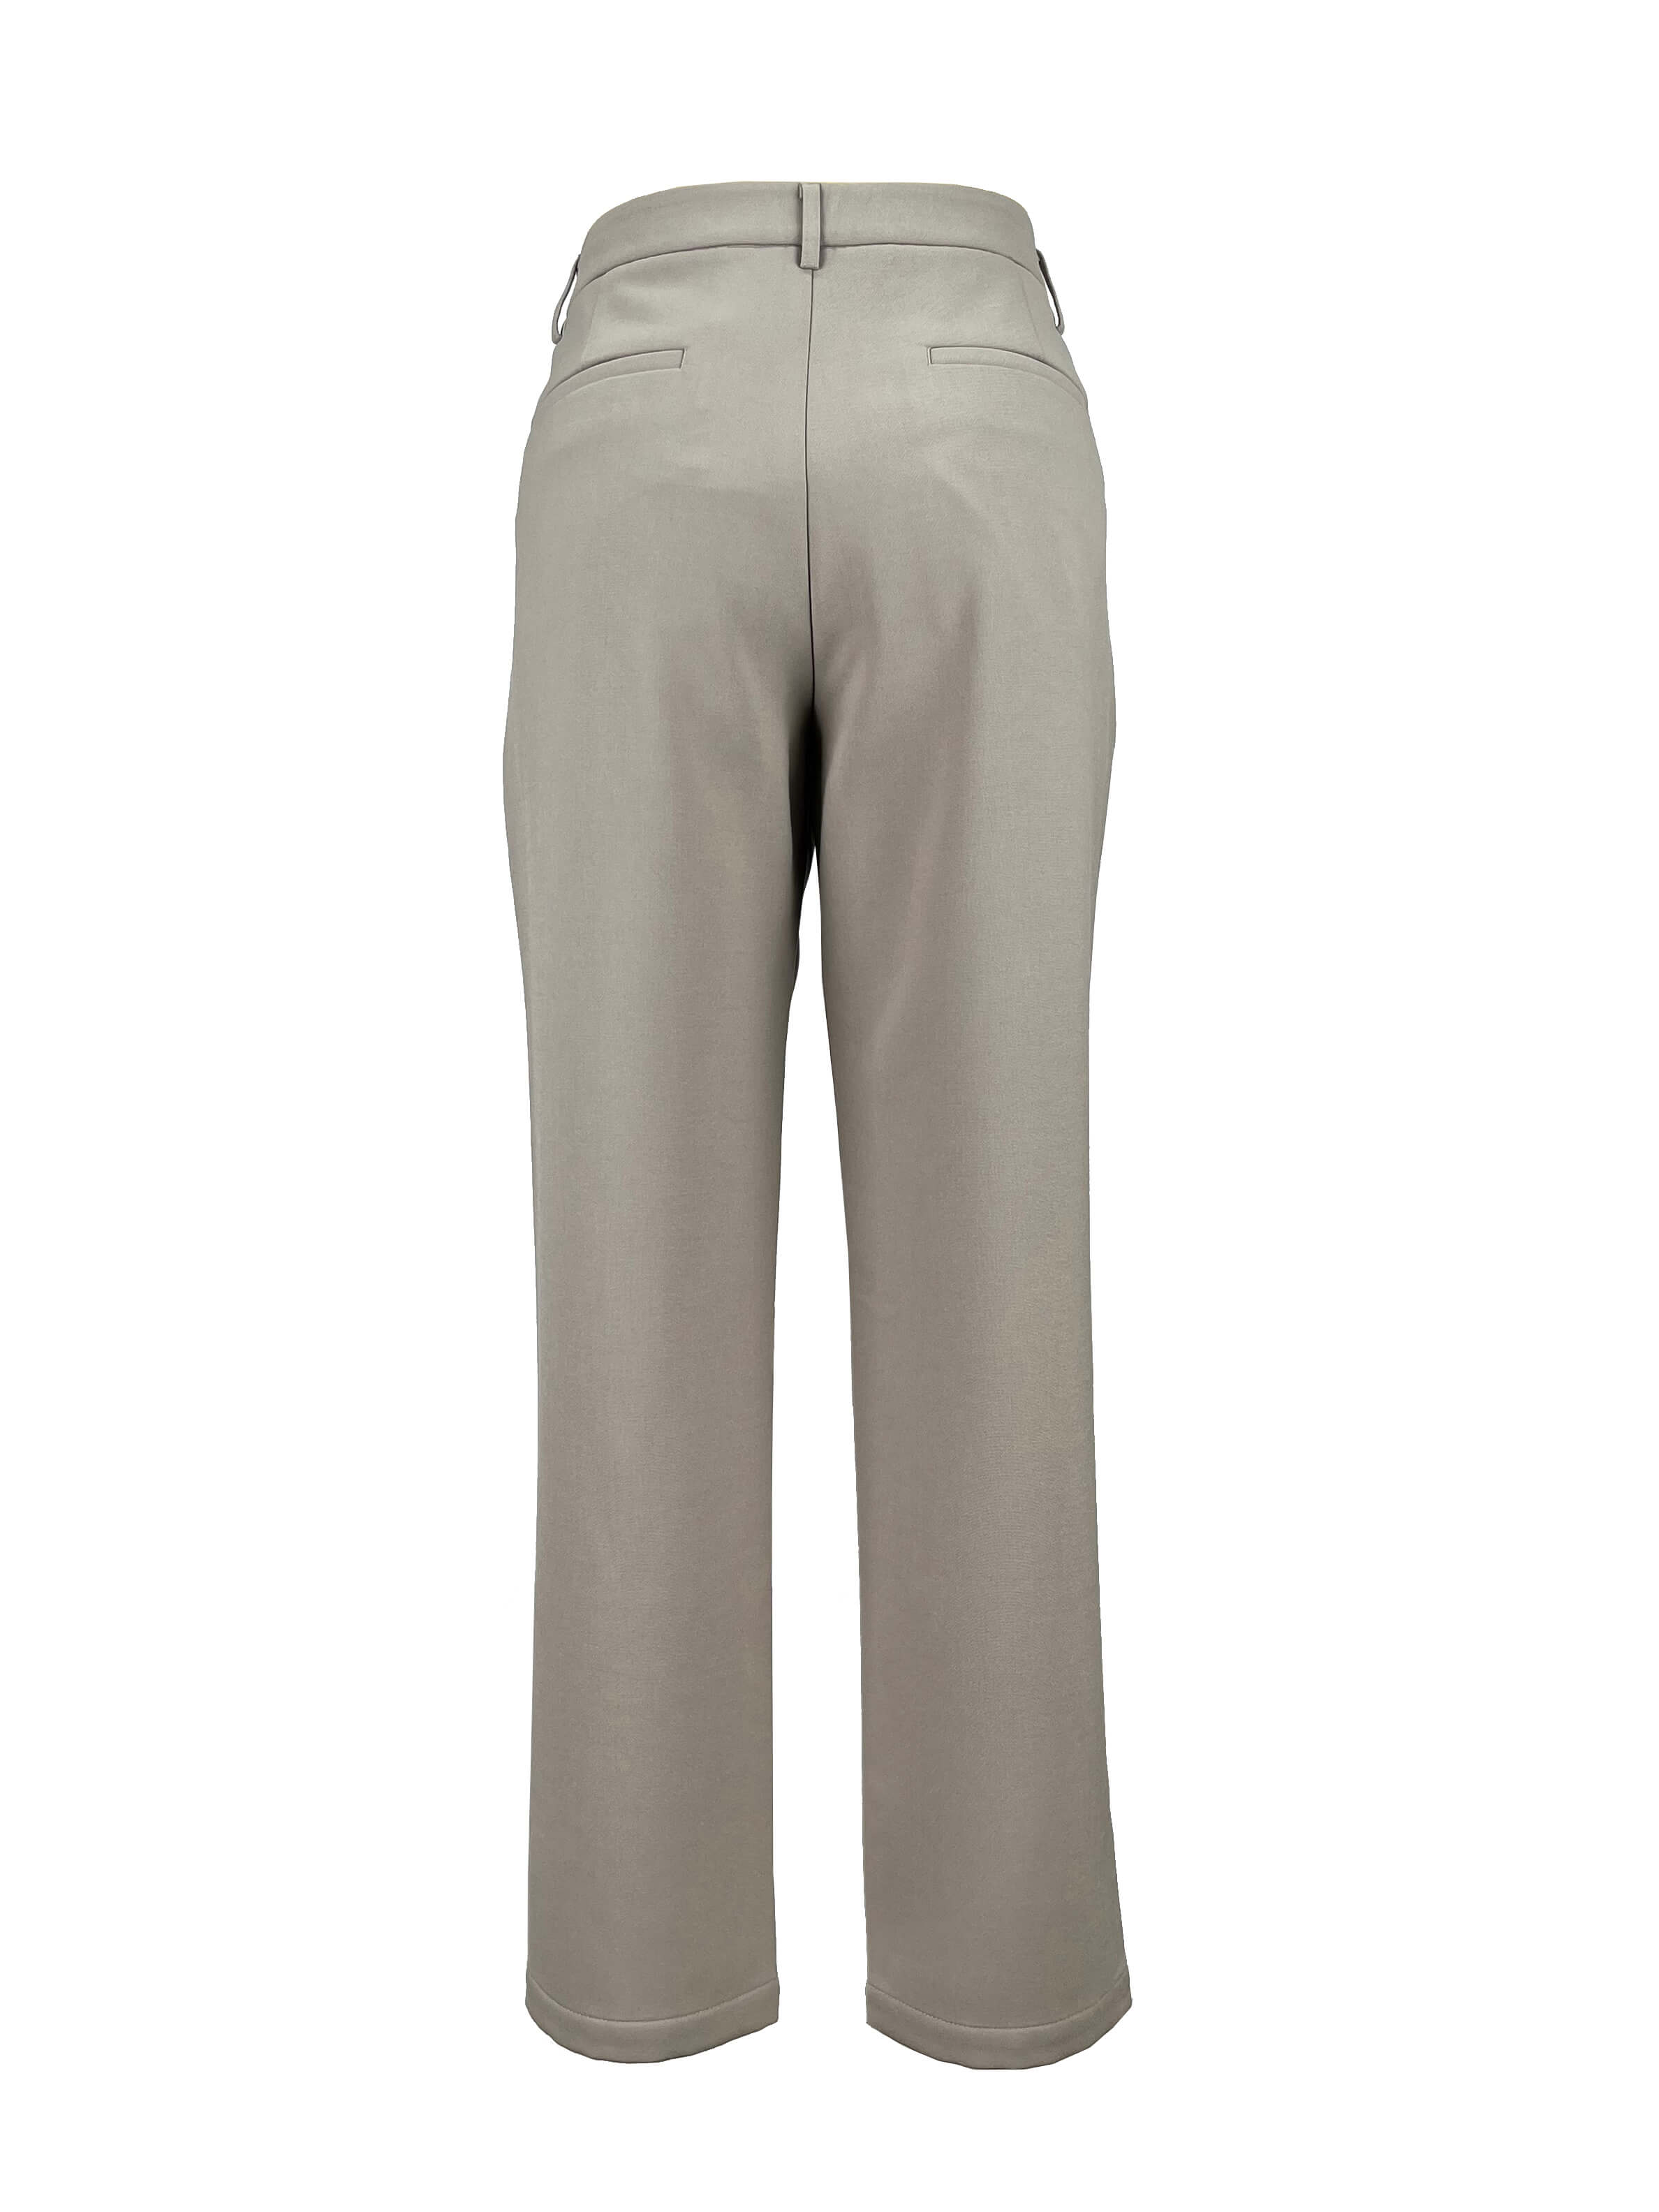 8.trousers (2)